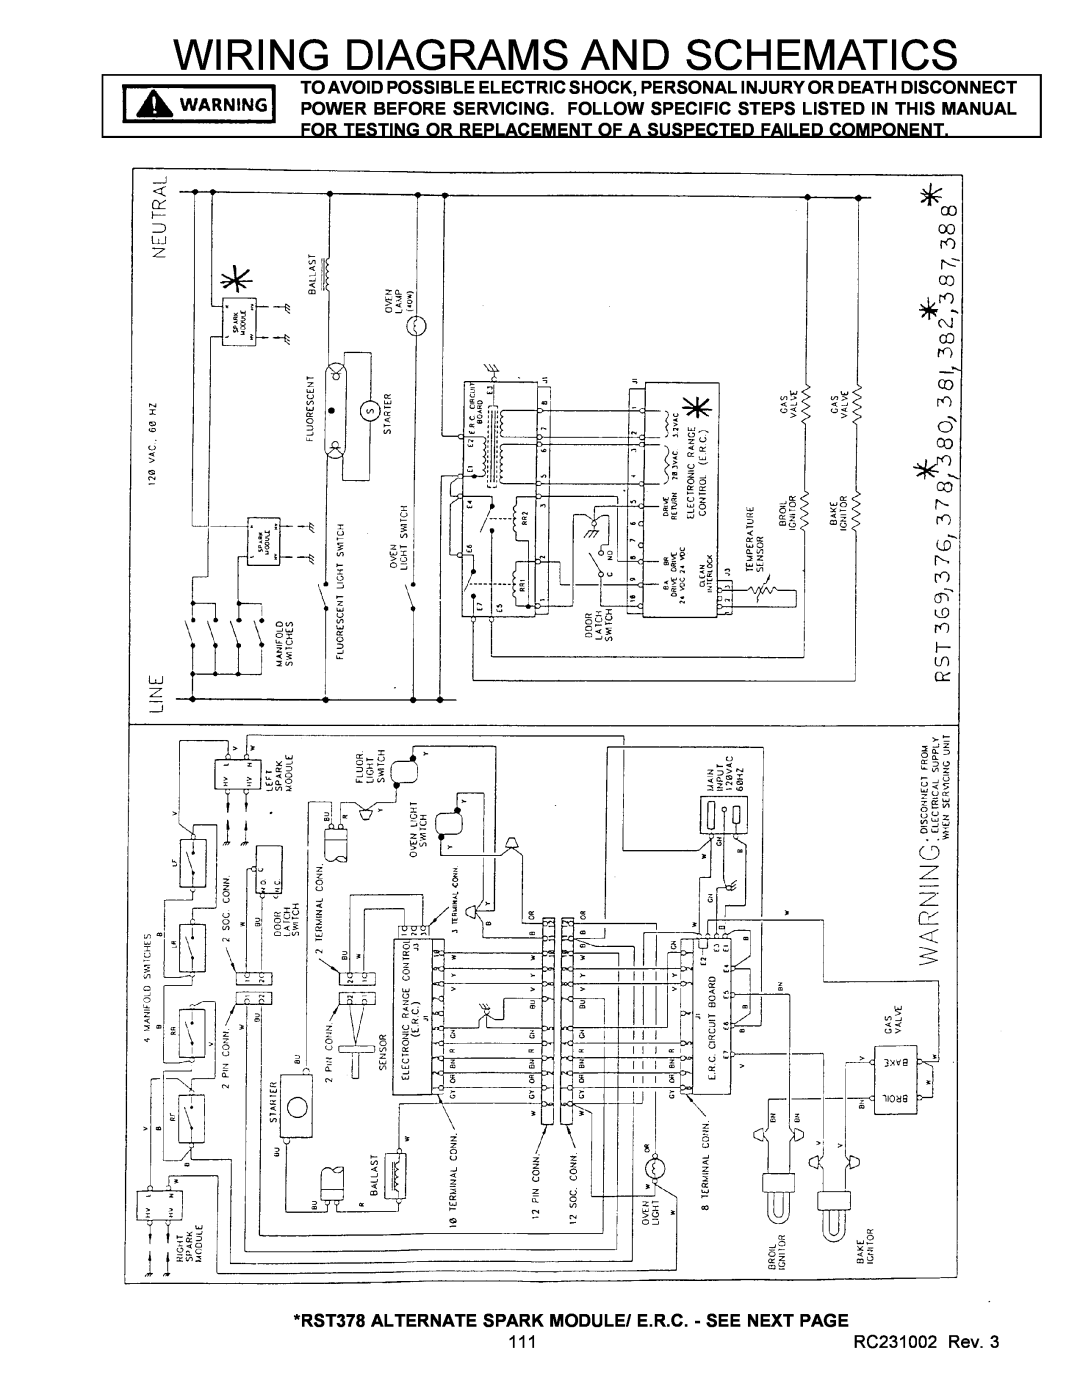 Amana RSS service manual RST378 ALTERNATE SPARK MODULE/ E.R.C. - SEE NEXT PAGE, Wiring Diagrams And Schematics 